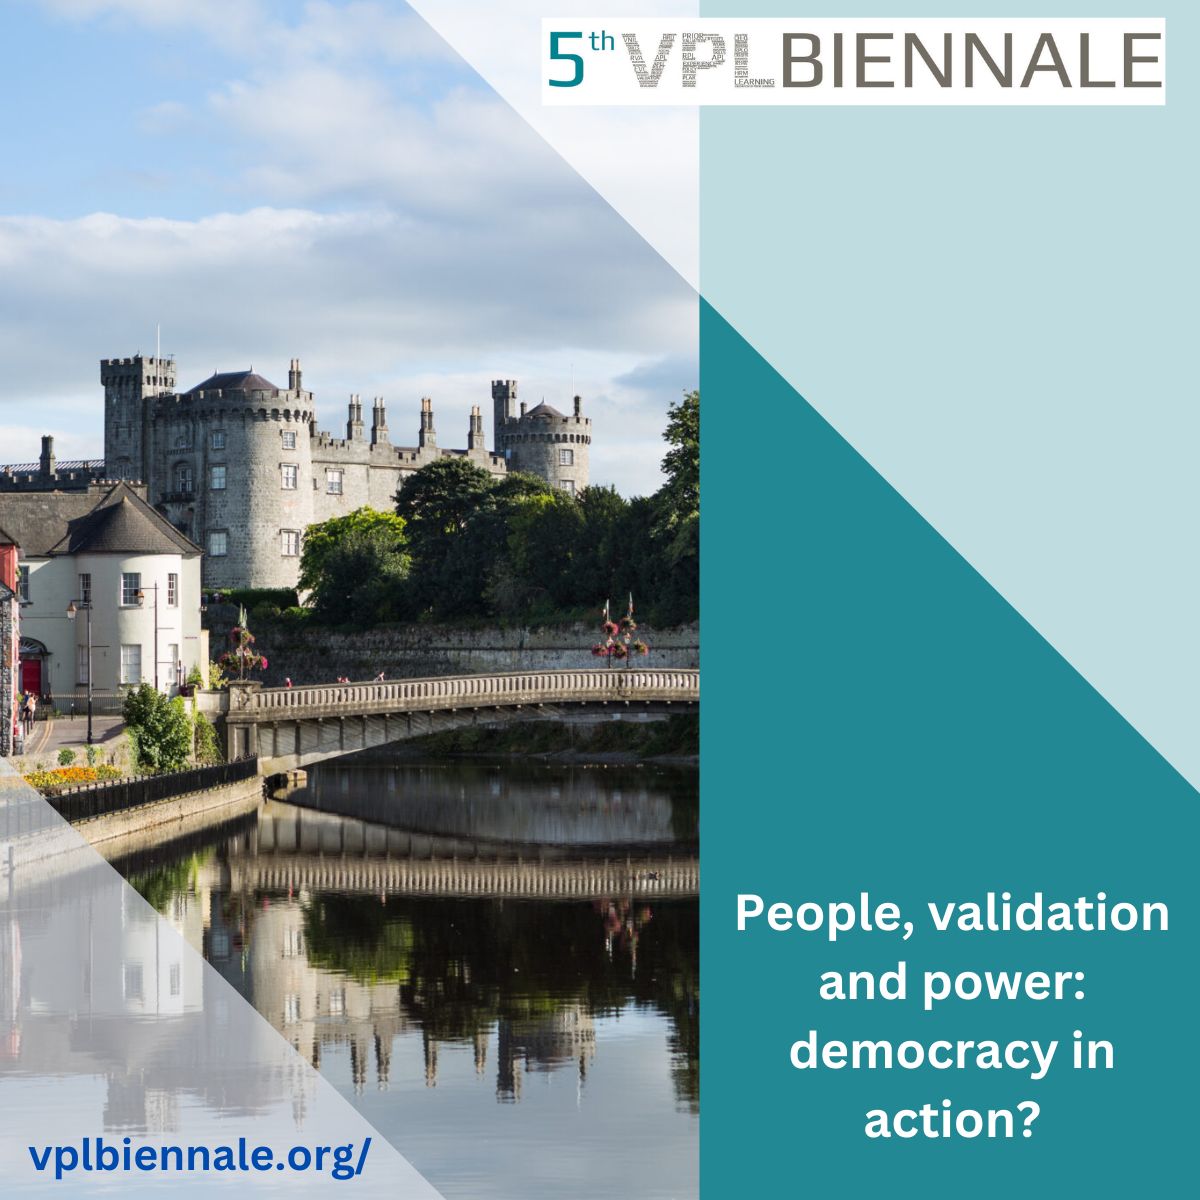 Excited for #5thVPLBiennale starting May 6th! This year's theme: 'People, validation, and power: democracy in action?' 🌍📚

🔗 Join the VPL Biennale LinkedIn Group tinyurl.com/2s3ffz96
🇨🇦🇮🇪🇺🇸 Hosted by Canada, Ireland & USA
📍 Kilkenny, Ireland
🔗vplbiennale.org